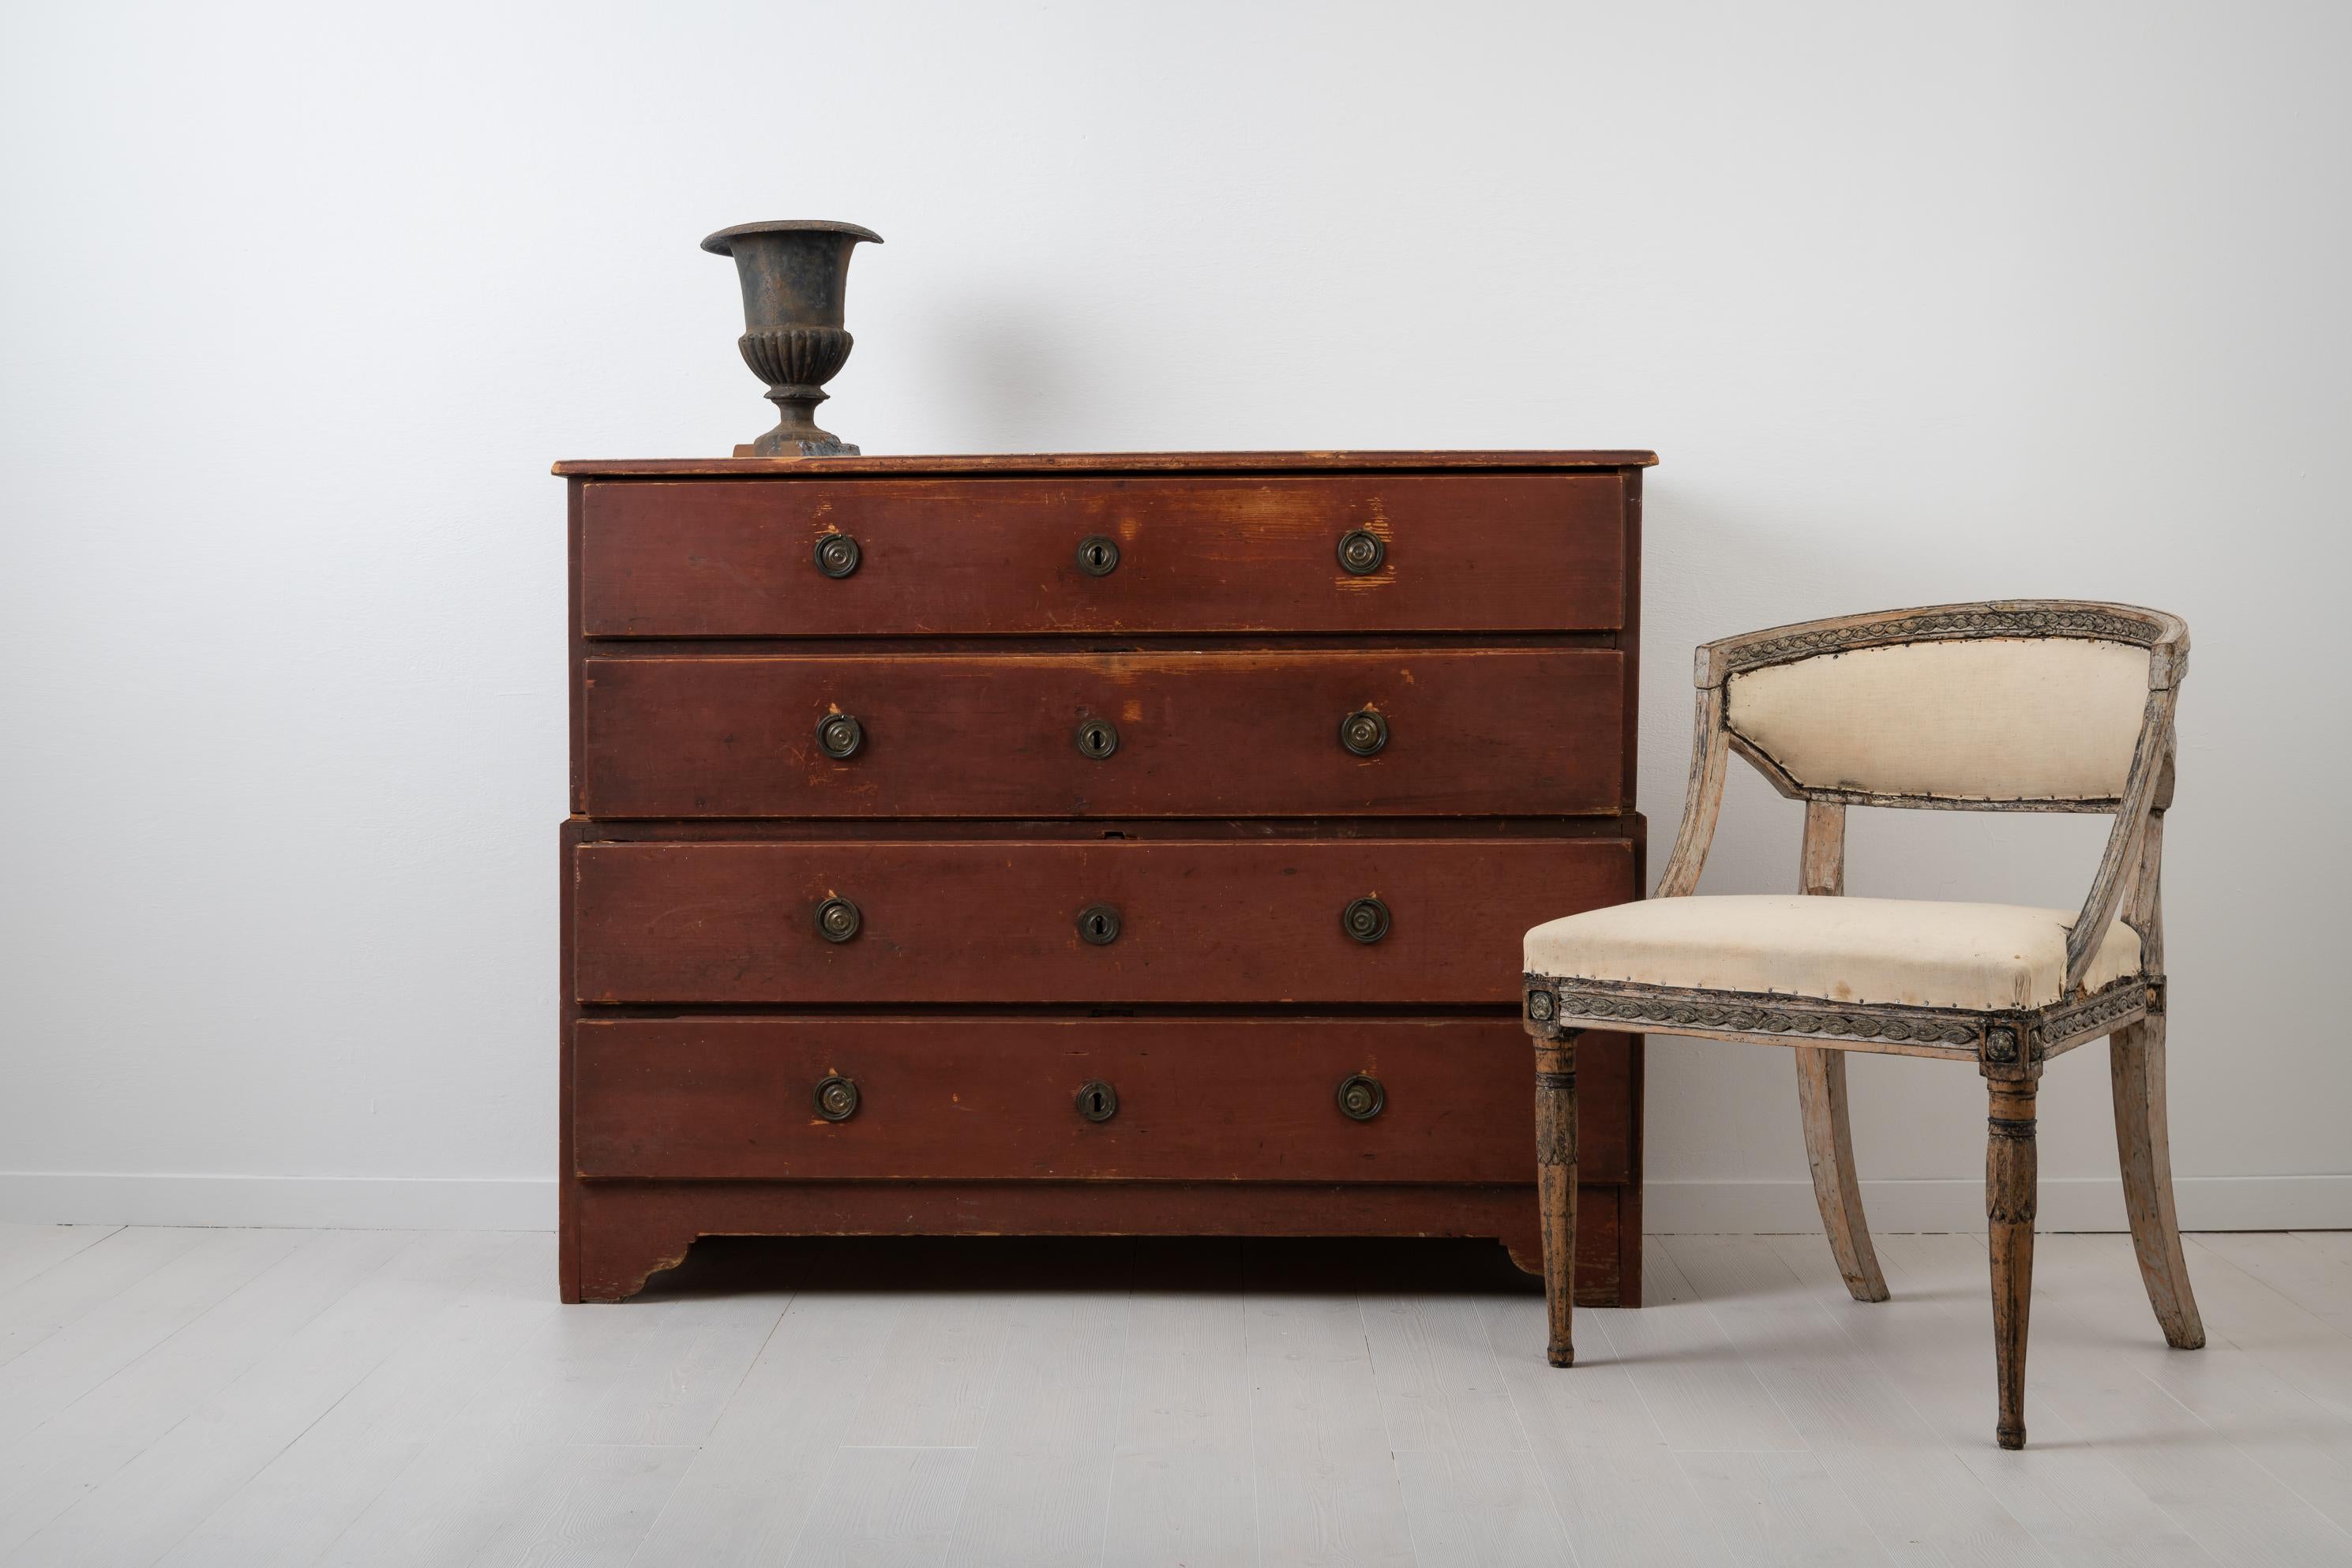 Chest of drawers in two parts from late 18th century, northern Sweden. The chest is from circa 1790 which is the Swedish Gustavian era, otherwise known as neoclassical. Typical to the period this chest has original hardware and original handles on